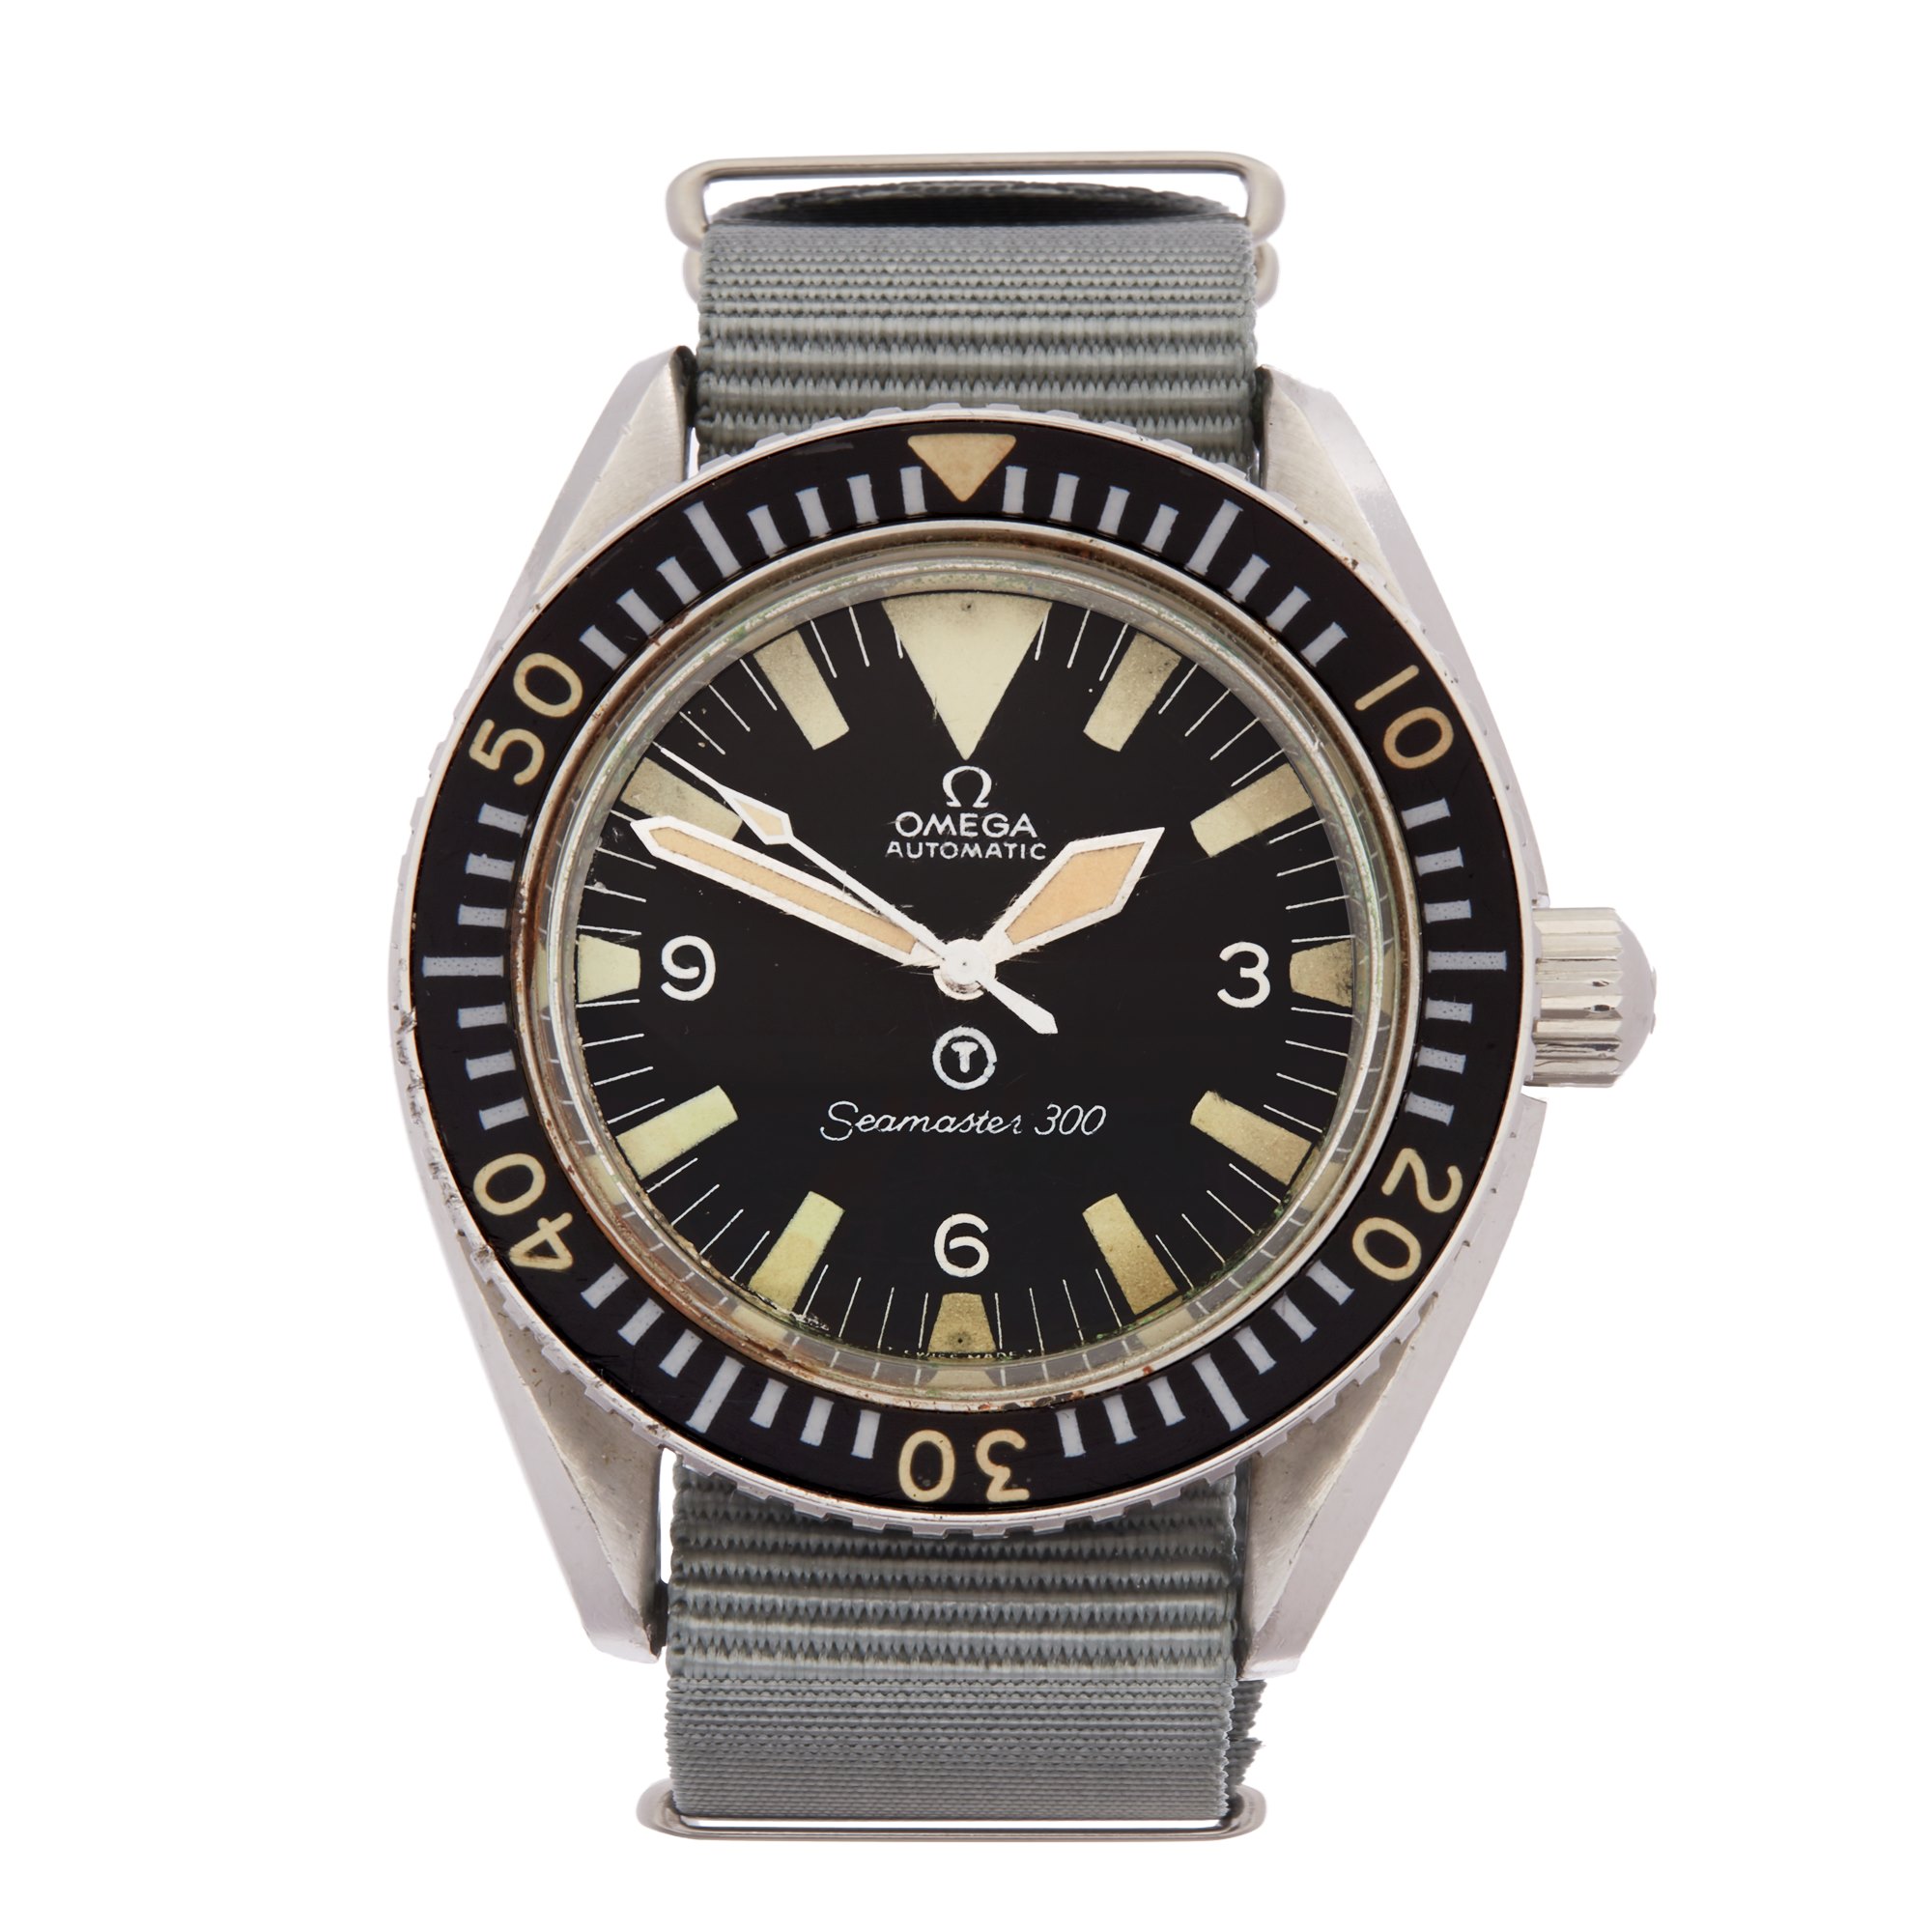 Omega Seamaster 300 T Dial Stainless Steel 165.024